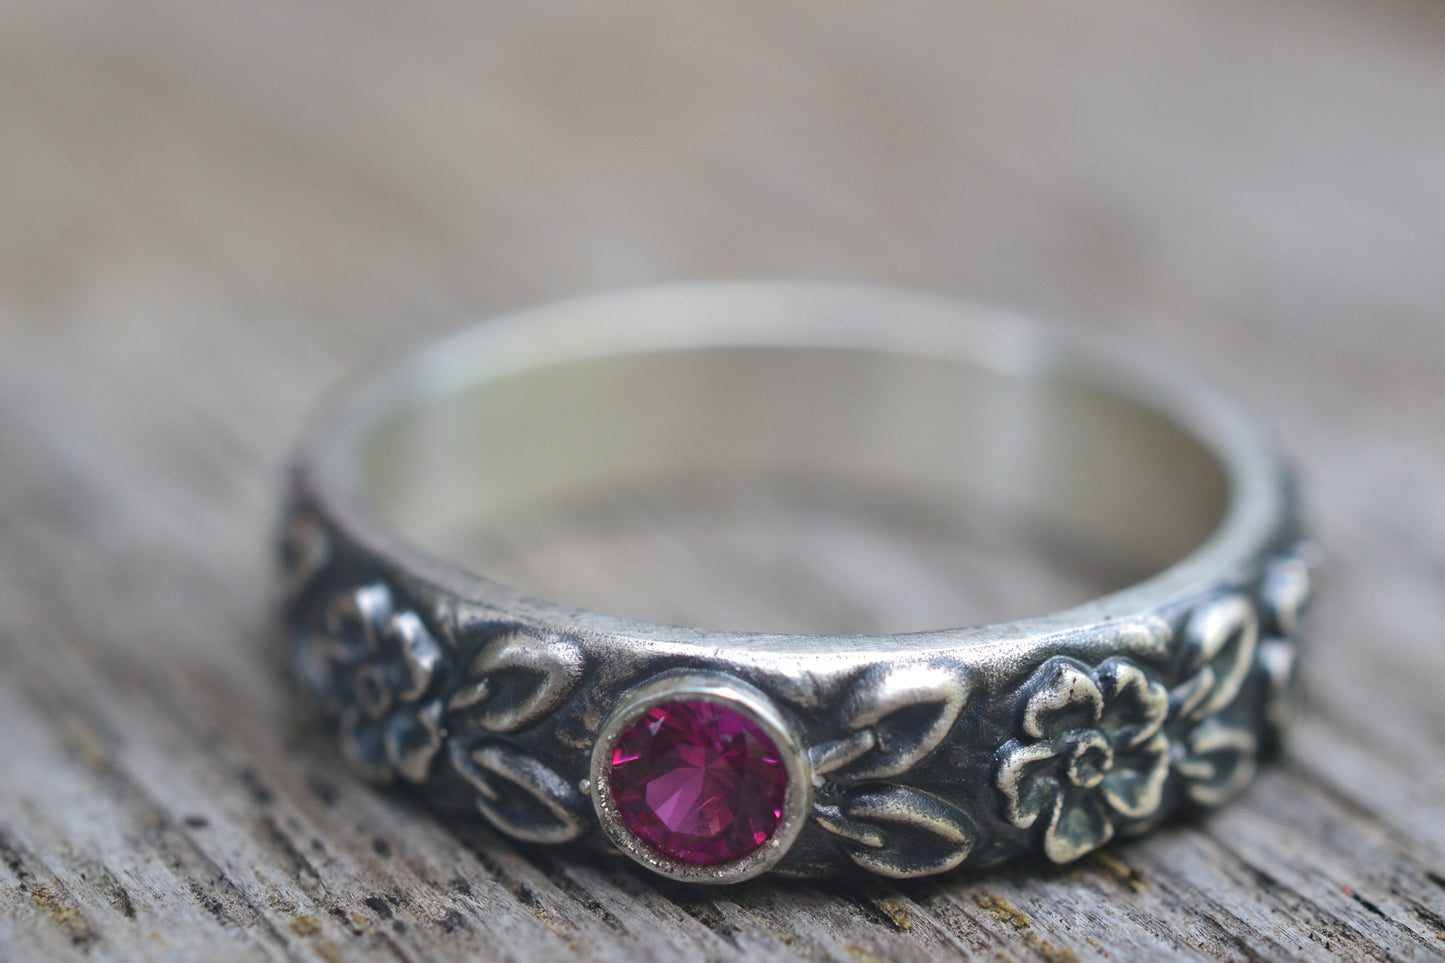 Ruby Wedding Band With Rose Pattern